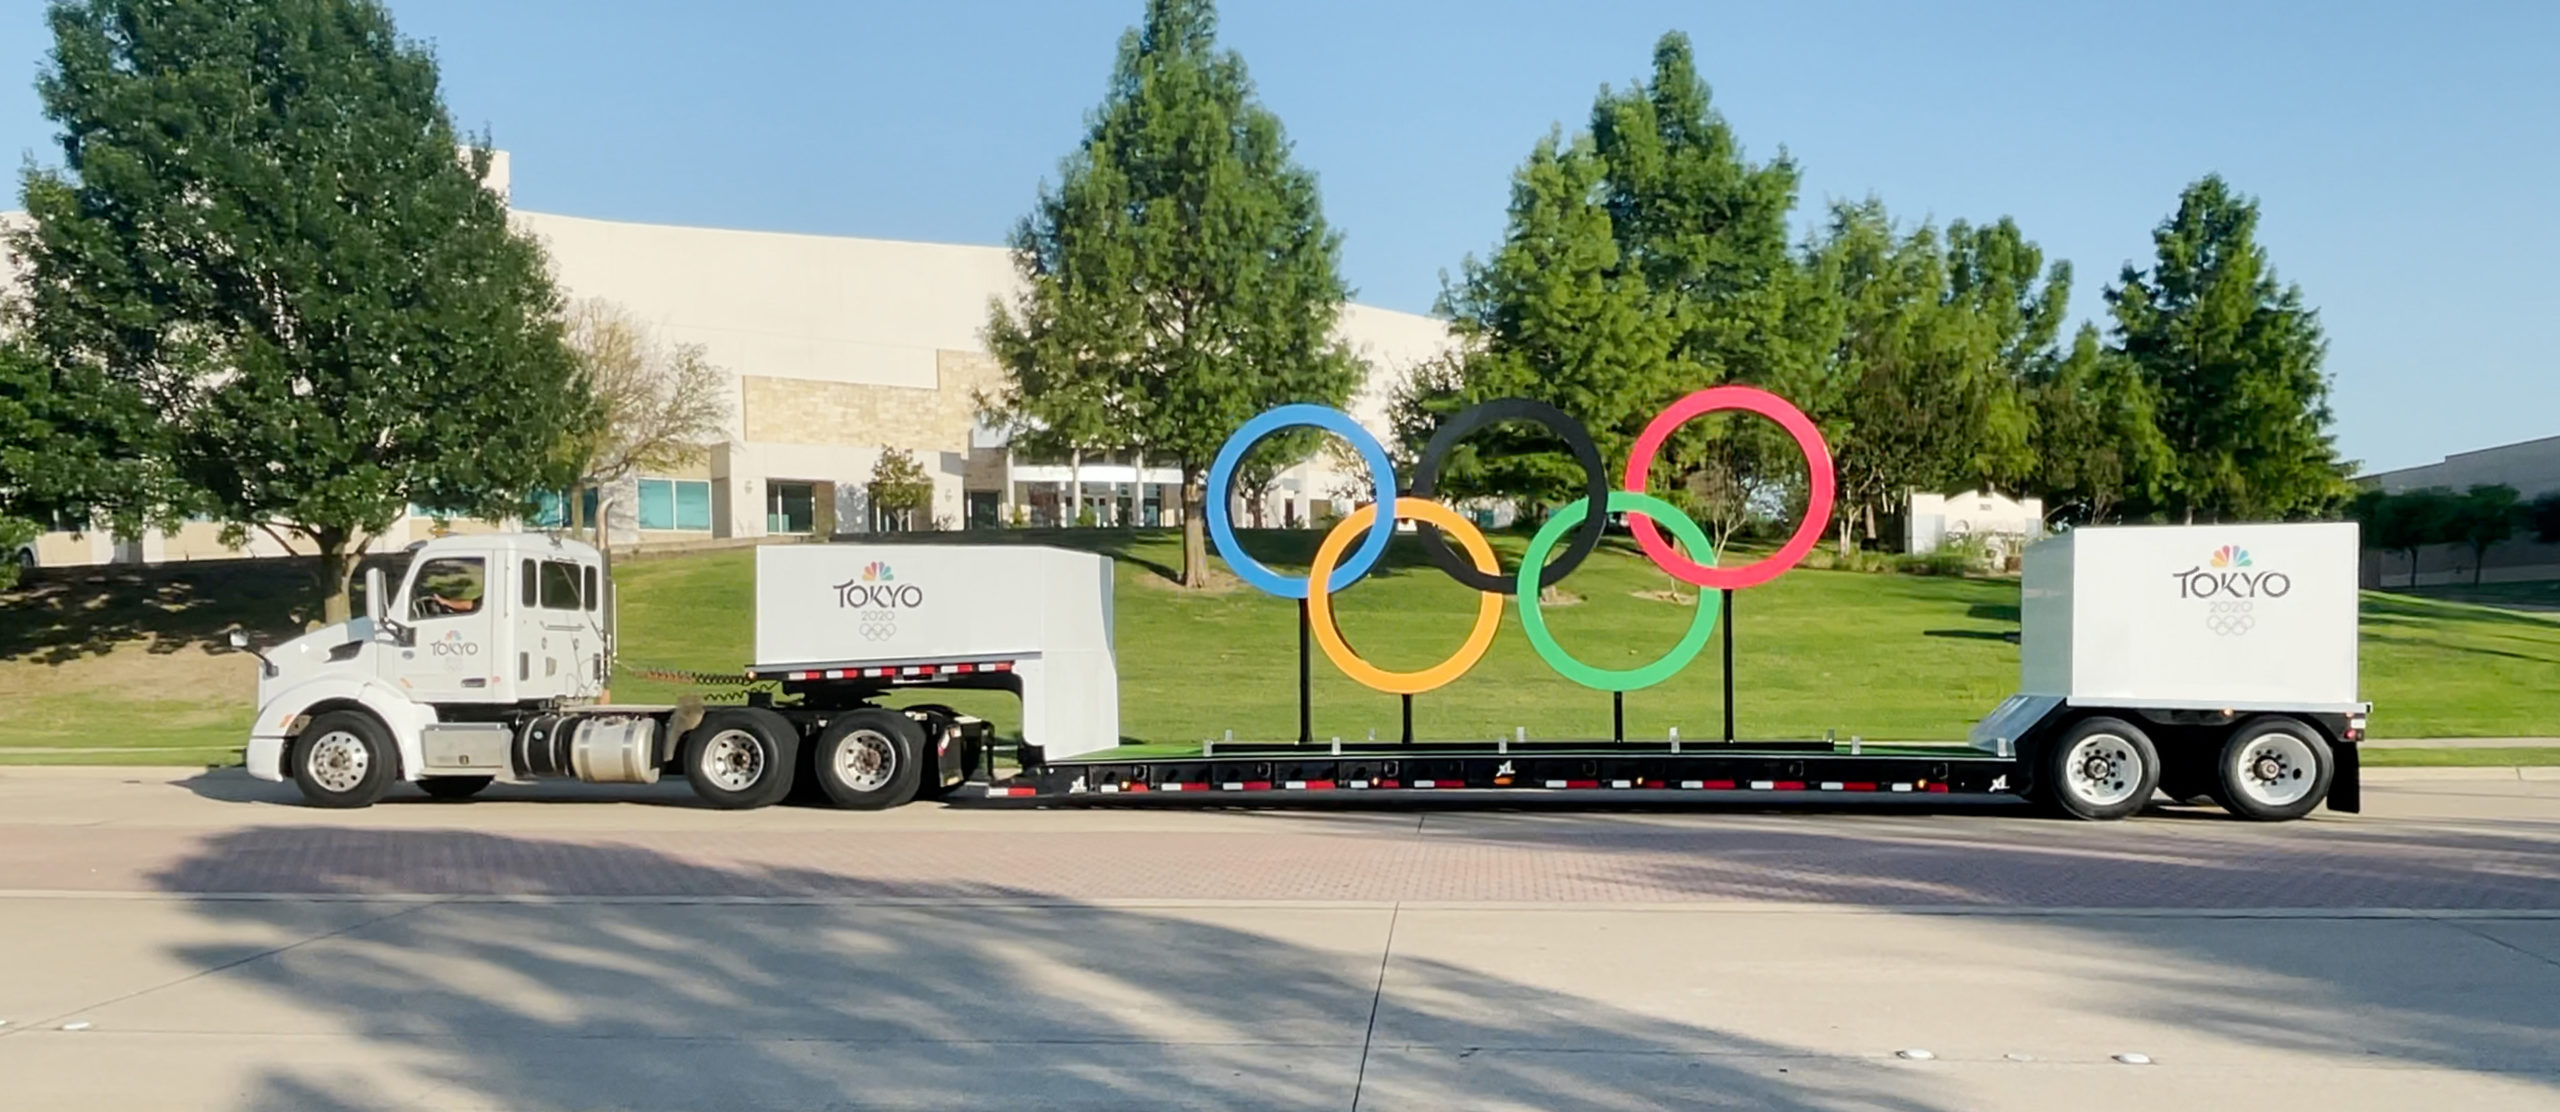 Life-Sized Set of Olympics Rings to Kick Off National “Rings Across America” Tour